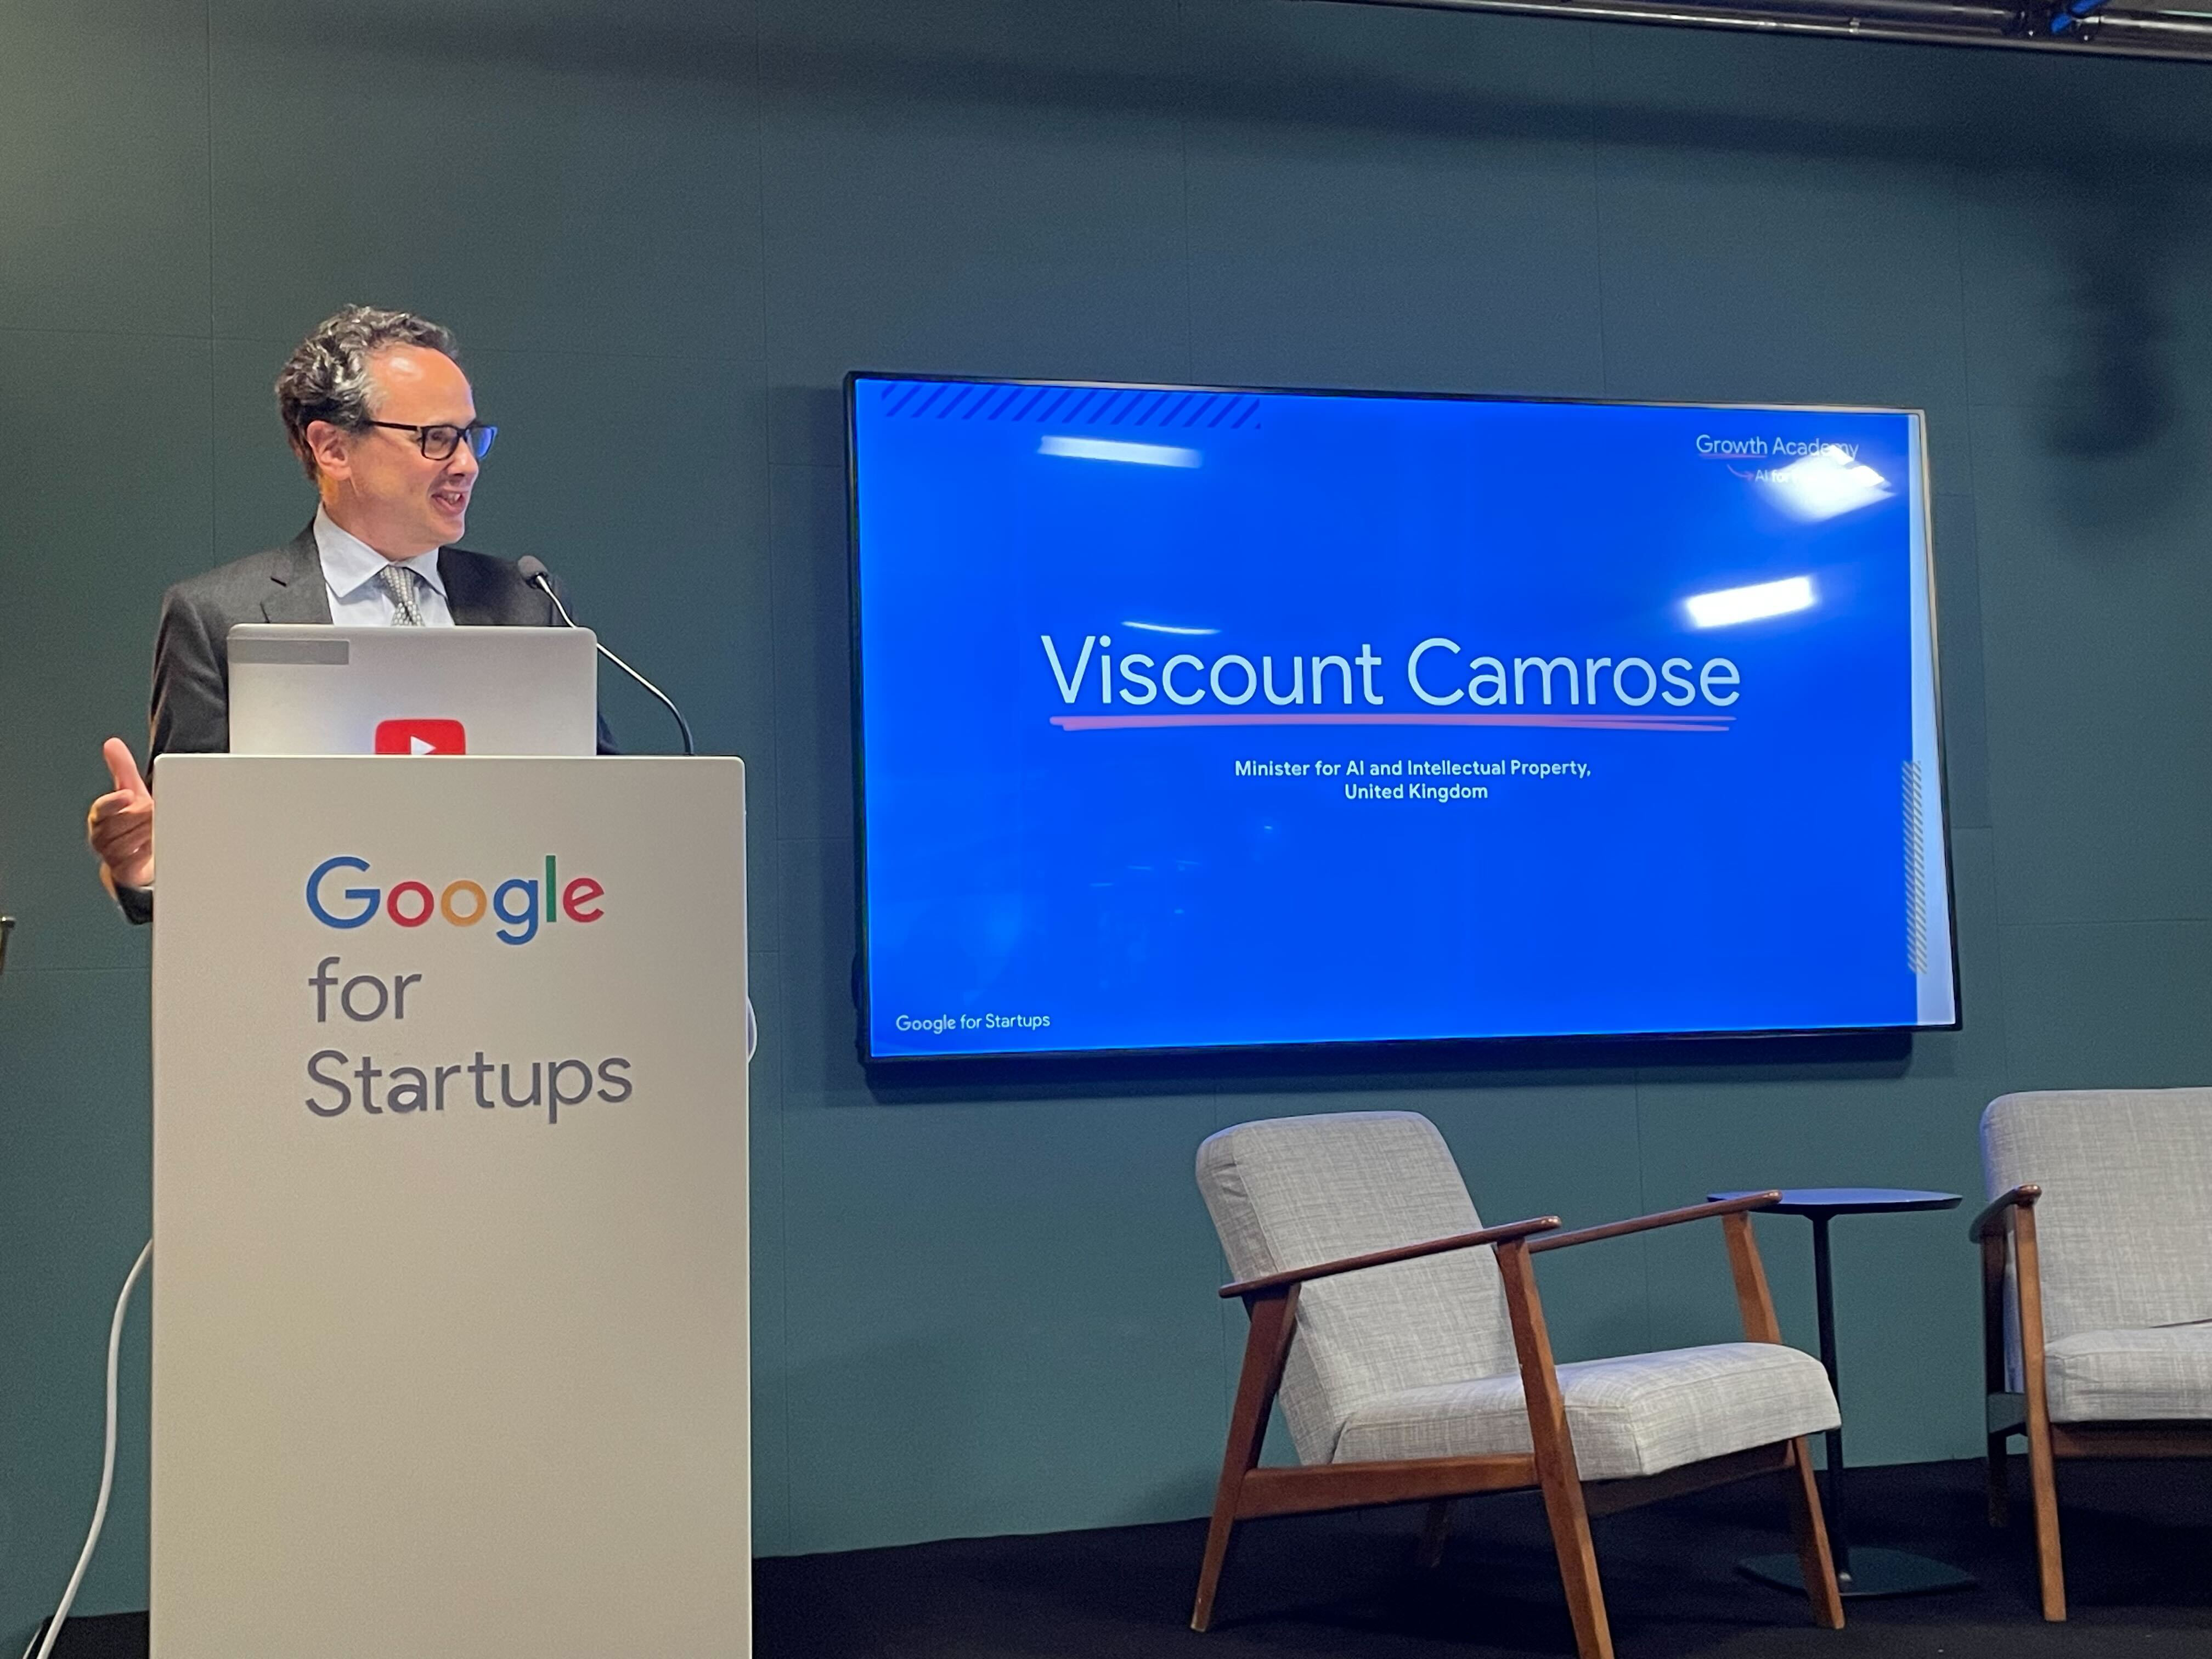 UK Minister for AI and Intellectual Property, Mr. Viscount Camrose